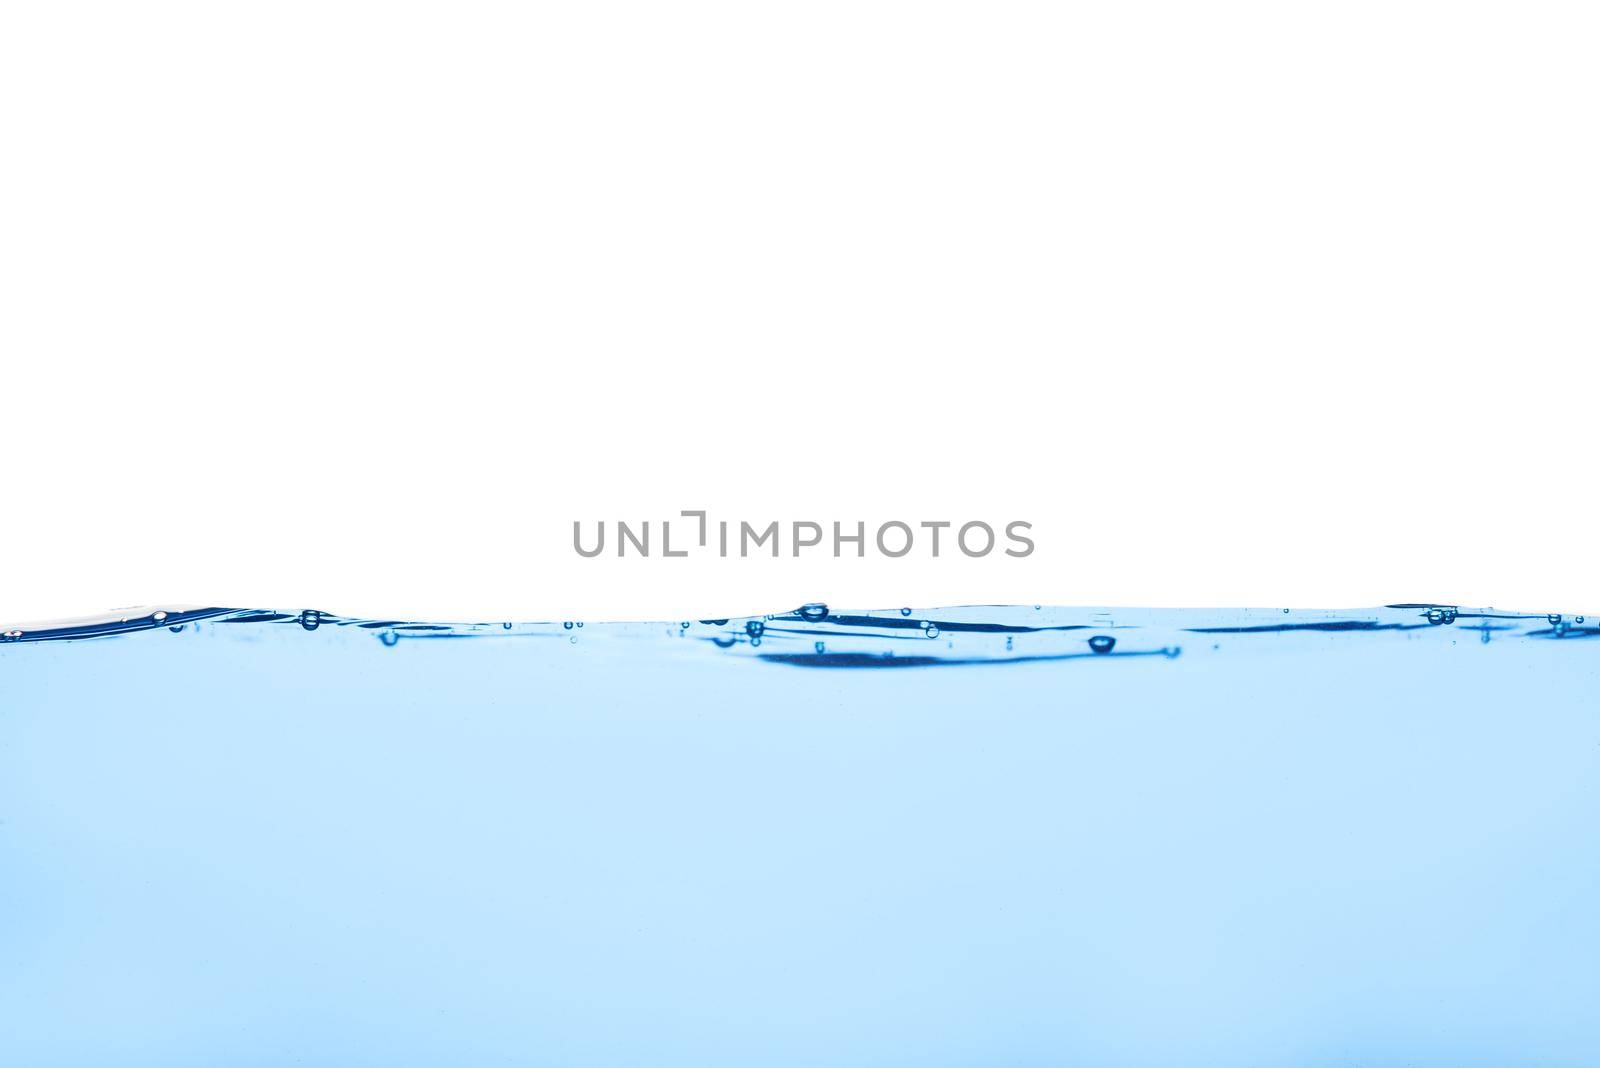 Abstract clean flow ripple surface on liquid by Sorapop